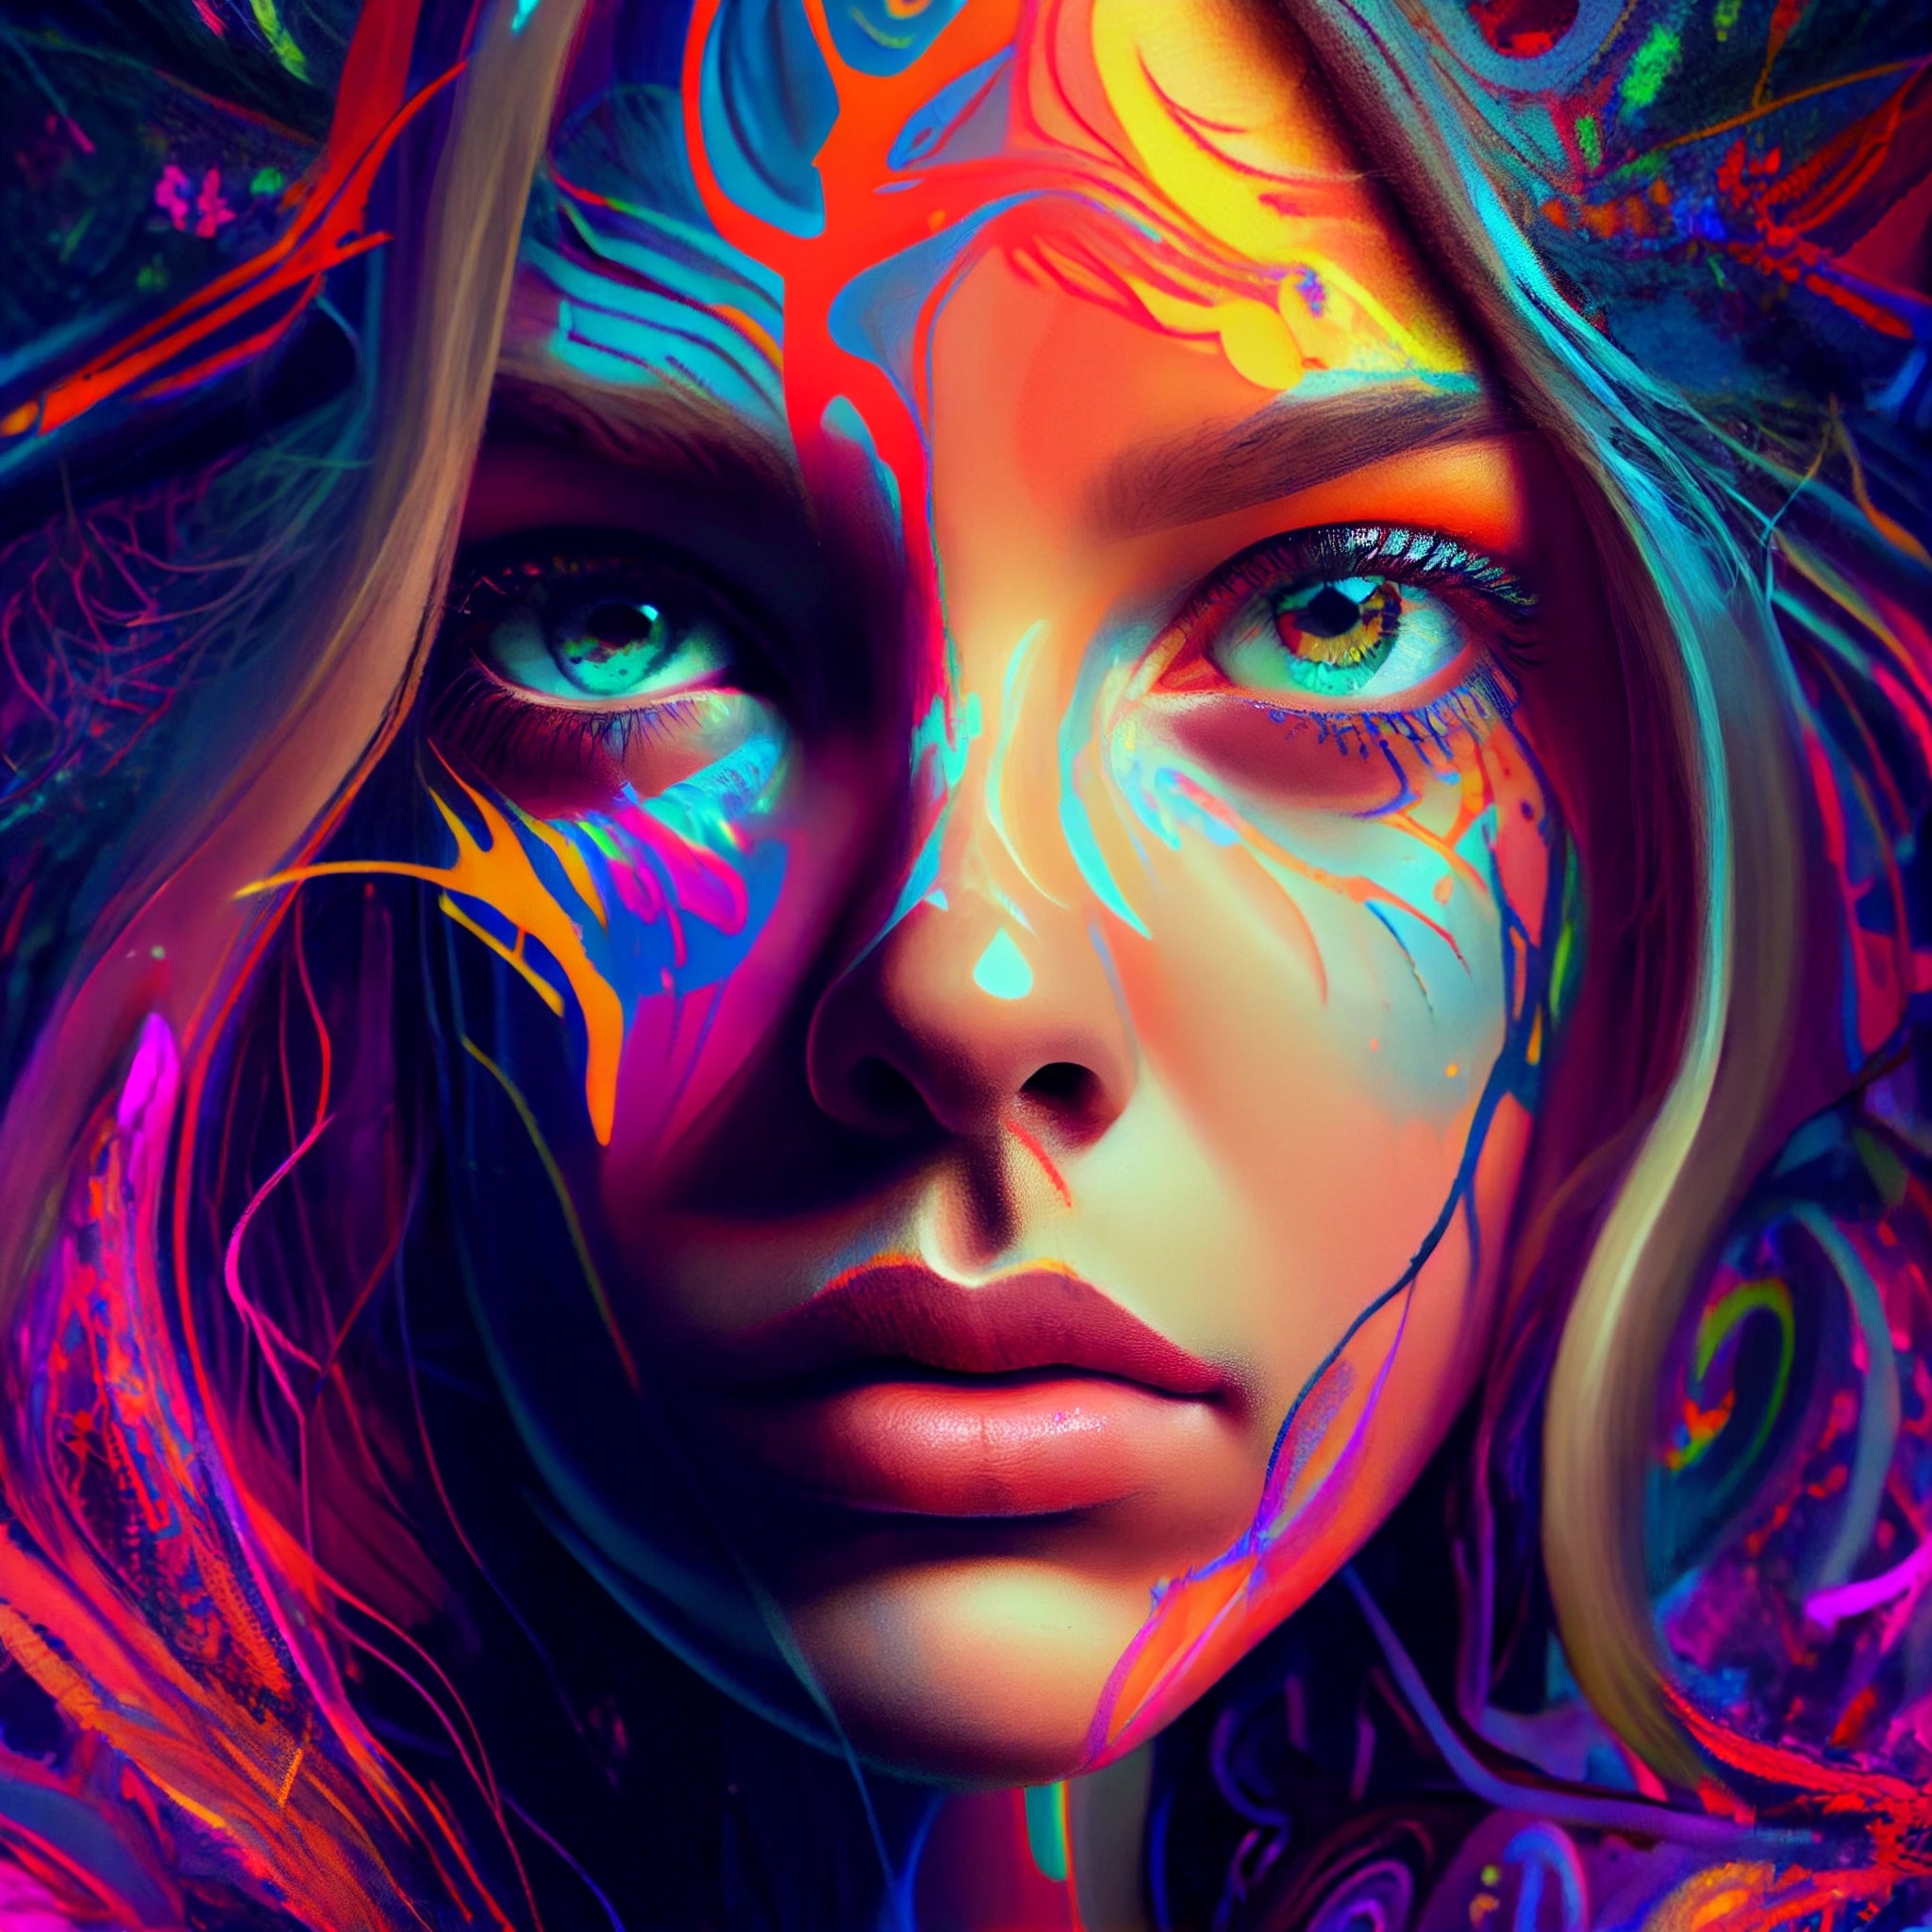 Psychedelic Girl with Beautiful Eyes Print for Living or Gaming Room Wall Decoration Purposes